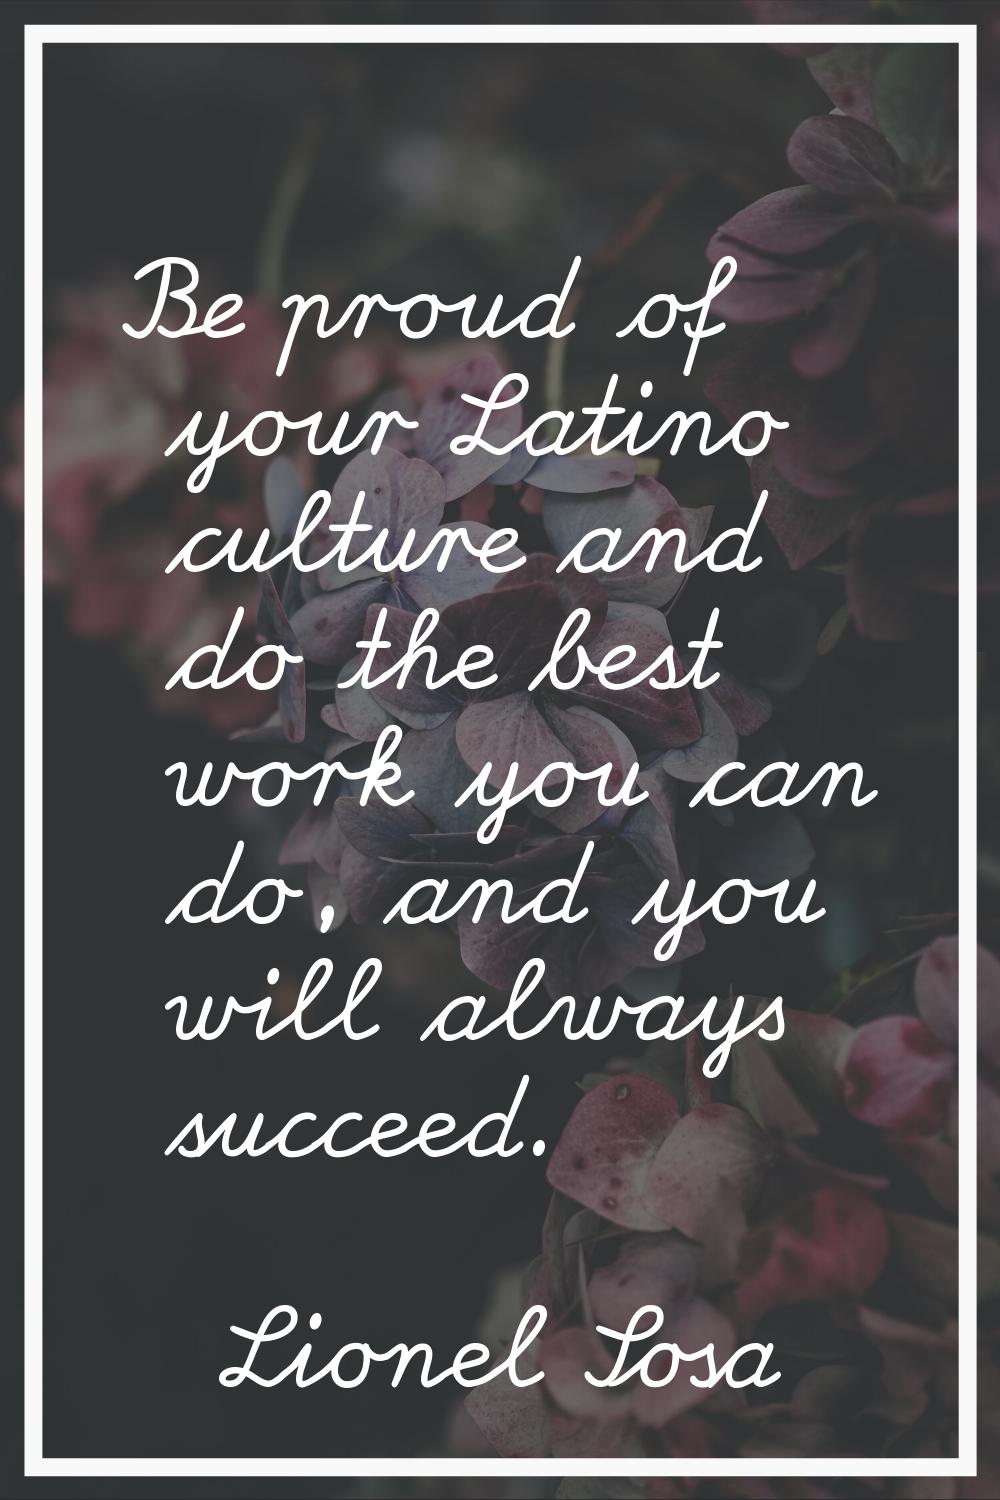 Be proud of your Latino culture and do the best work you can do, and you will always succeed.